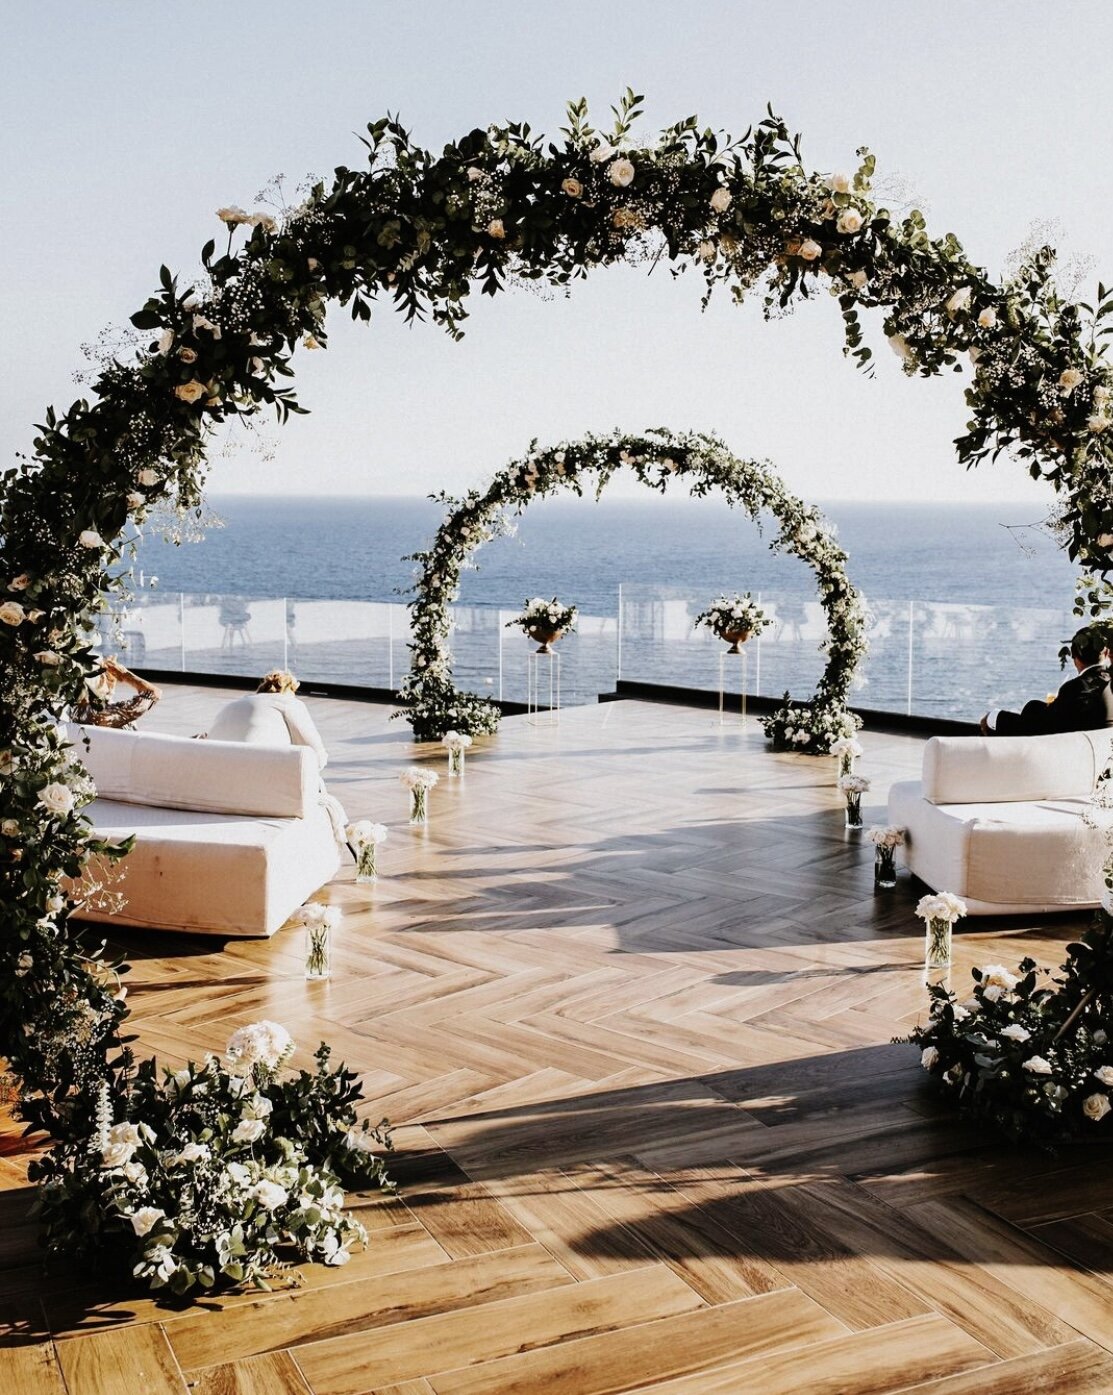 Celebrate life's extraordinary moments at Myconian Collection Hotels, where every event is crafted with precision and passion.

With a superlative record and reputation, we specialize in bringing dreams to life &ndash; from idyllic weddings and chris